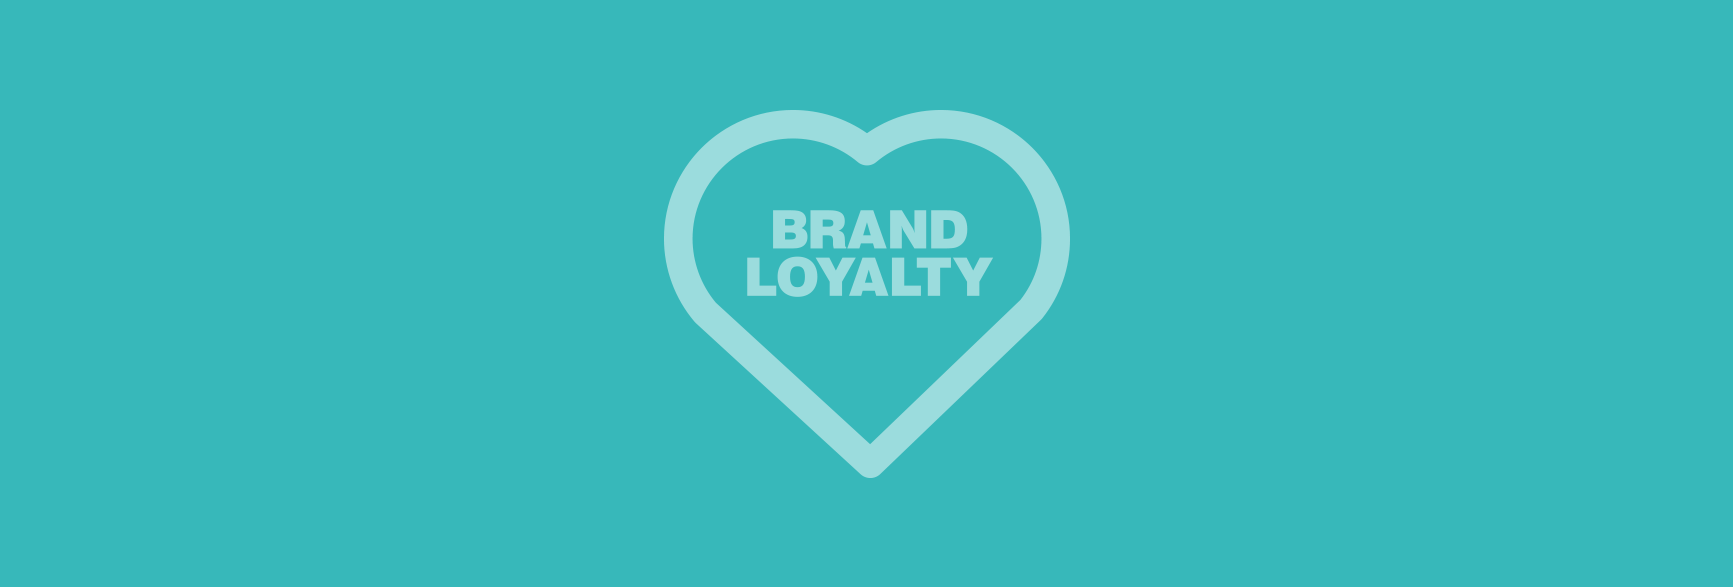 Ten ways to super charge brand loyalty